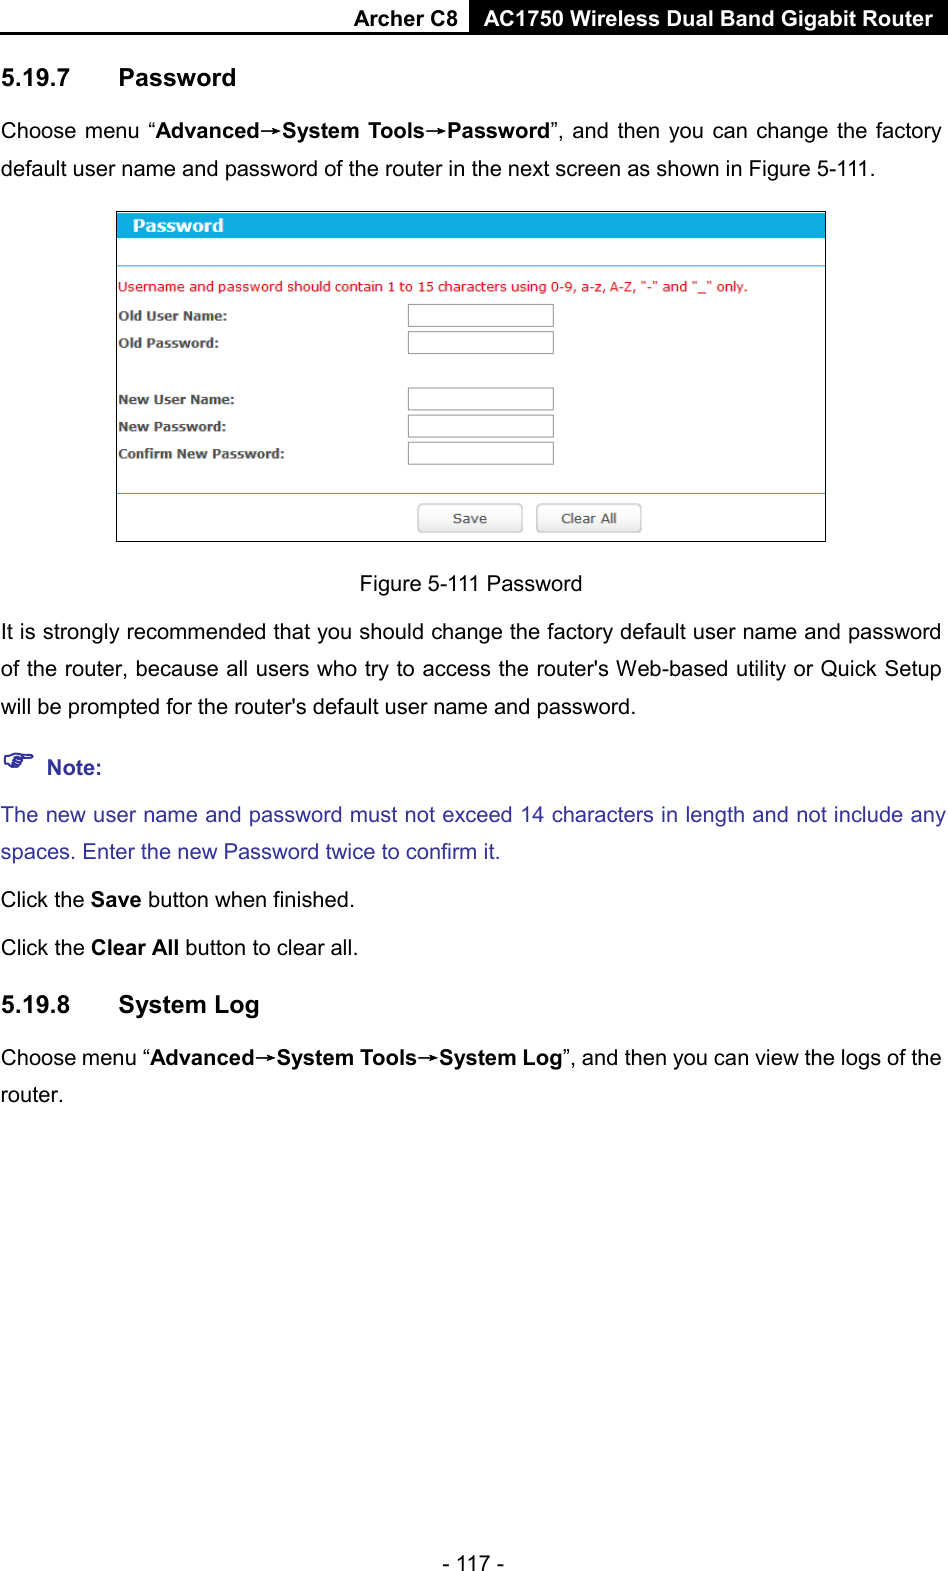 Archer C8 AC1750 Wireless Dual Band Gigabit Router  - 117 - 5.19.7 Password Choose menu “Advanced→System Tools→Password”, and then you can change the factory default user name and password of the router in the next screen as shown in Figure 5-111.  Figure 5-111 Password It is strongly recommended that you should change the factory default user name and password of the router, because all users who try to access the router&apos;s Web-based utility or Quick Setup will be prompted for the router&apos;s default user name and password.  Note: The new user name and password must not exceed 14 characters in length and not include any spaces. Enter the new Password twice to confirm it. Click the Save button when finished. Click the Clear All button to clear all. 5.19.8 System Log Choose menu “Advanced→System Tools→System Log”, and then you can view the logs of the router. 